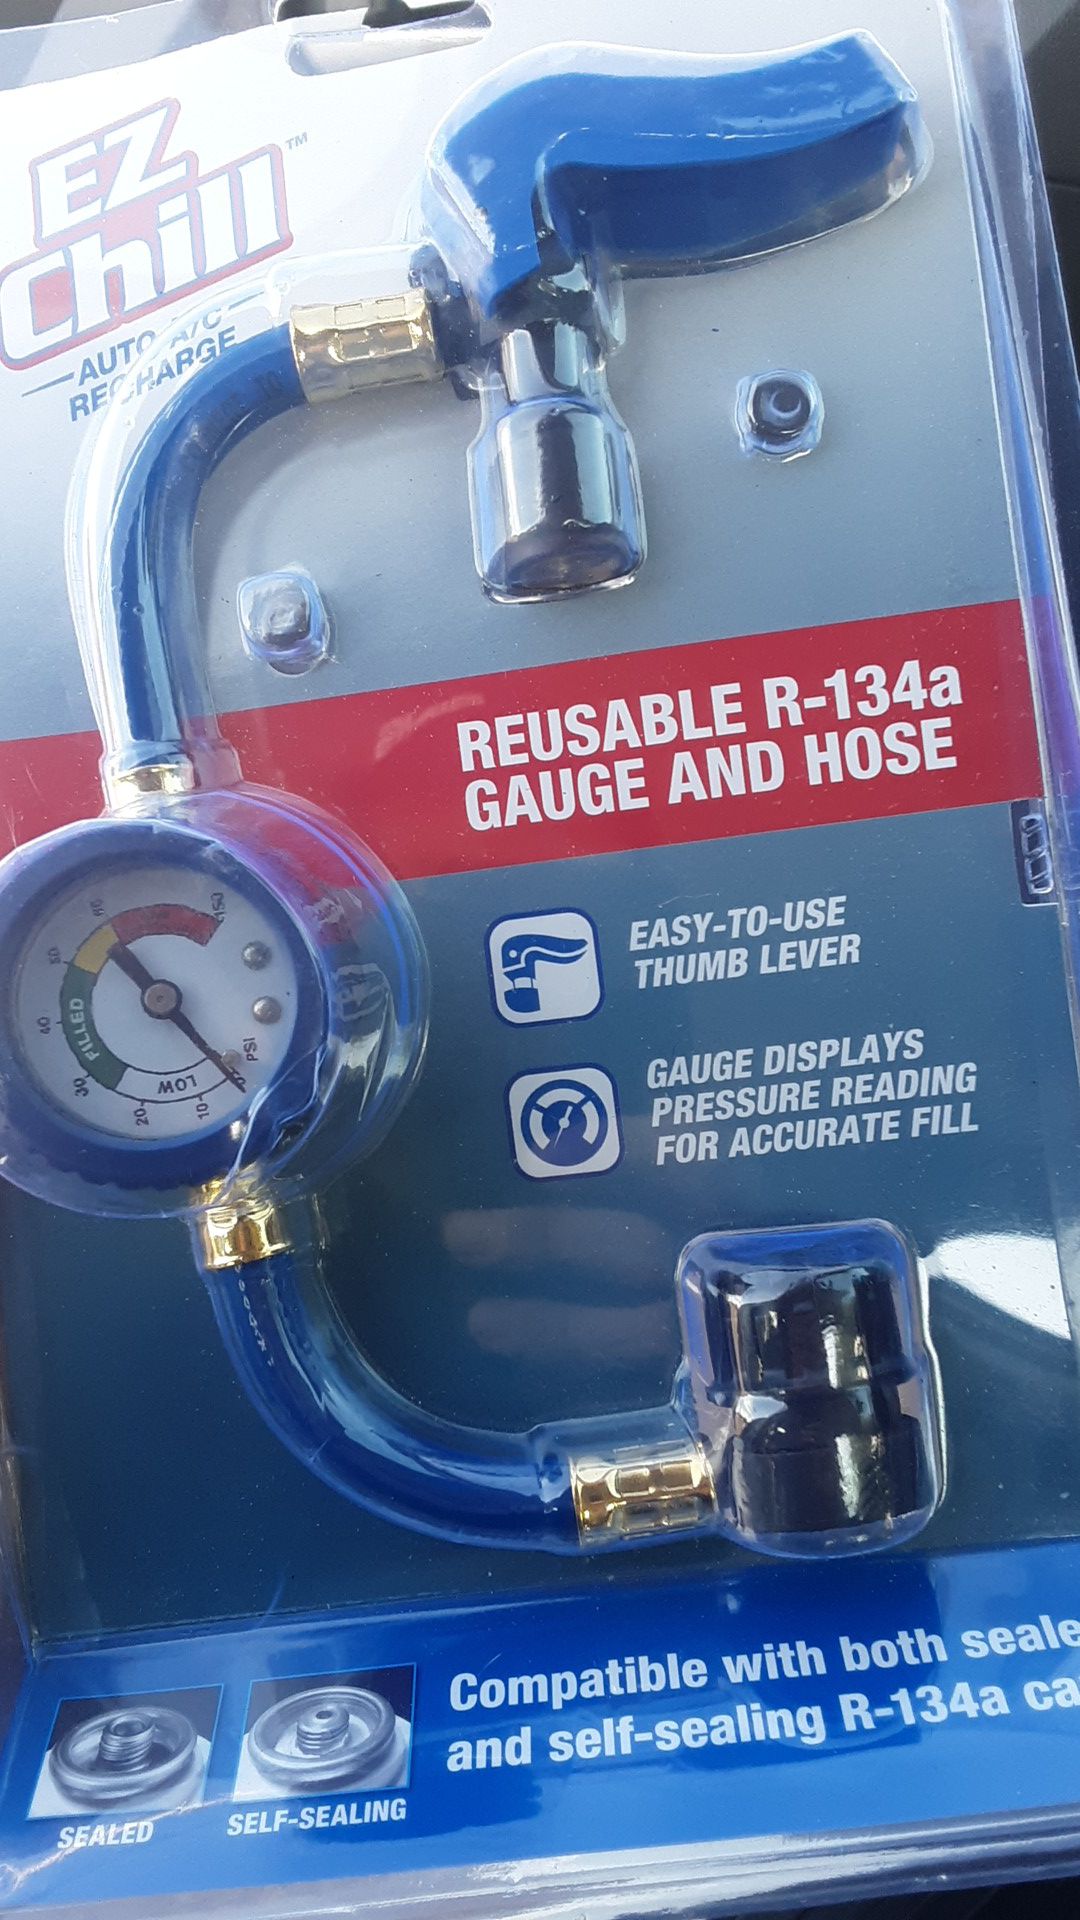 New EZ CHILL REUSABLE R-134A GAUGE AND HOSE